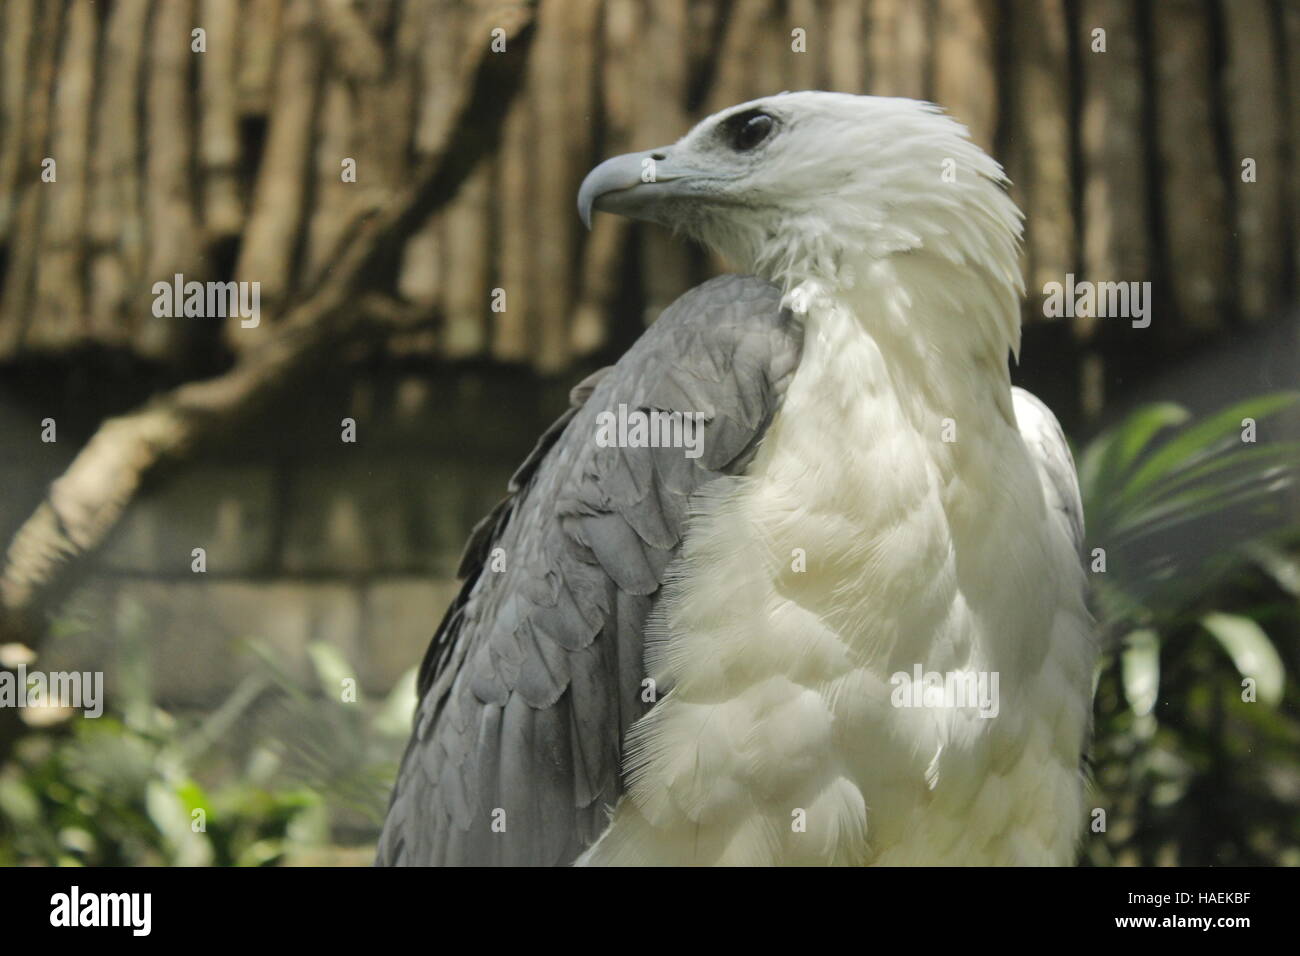 eagle with grey and white feathers have dark eyes Stock Photo